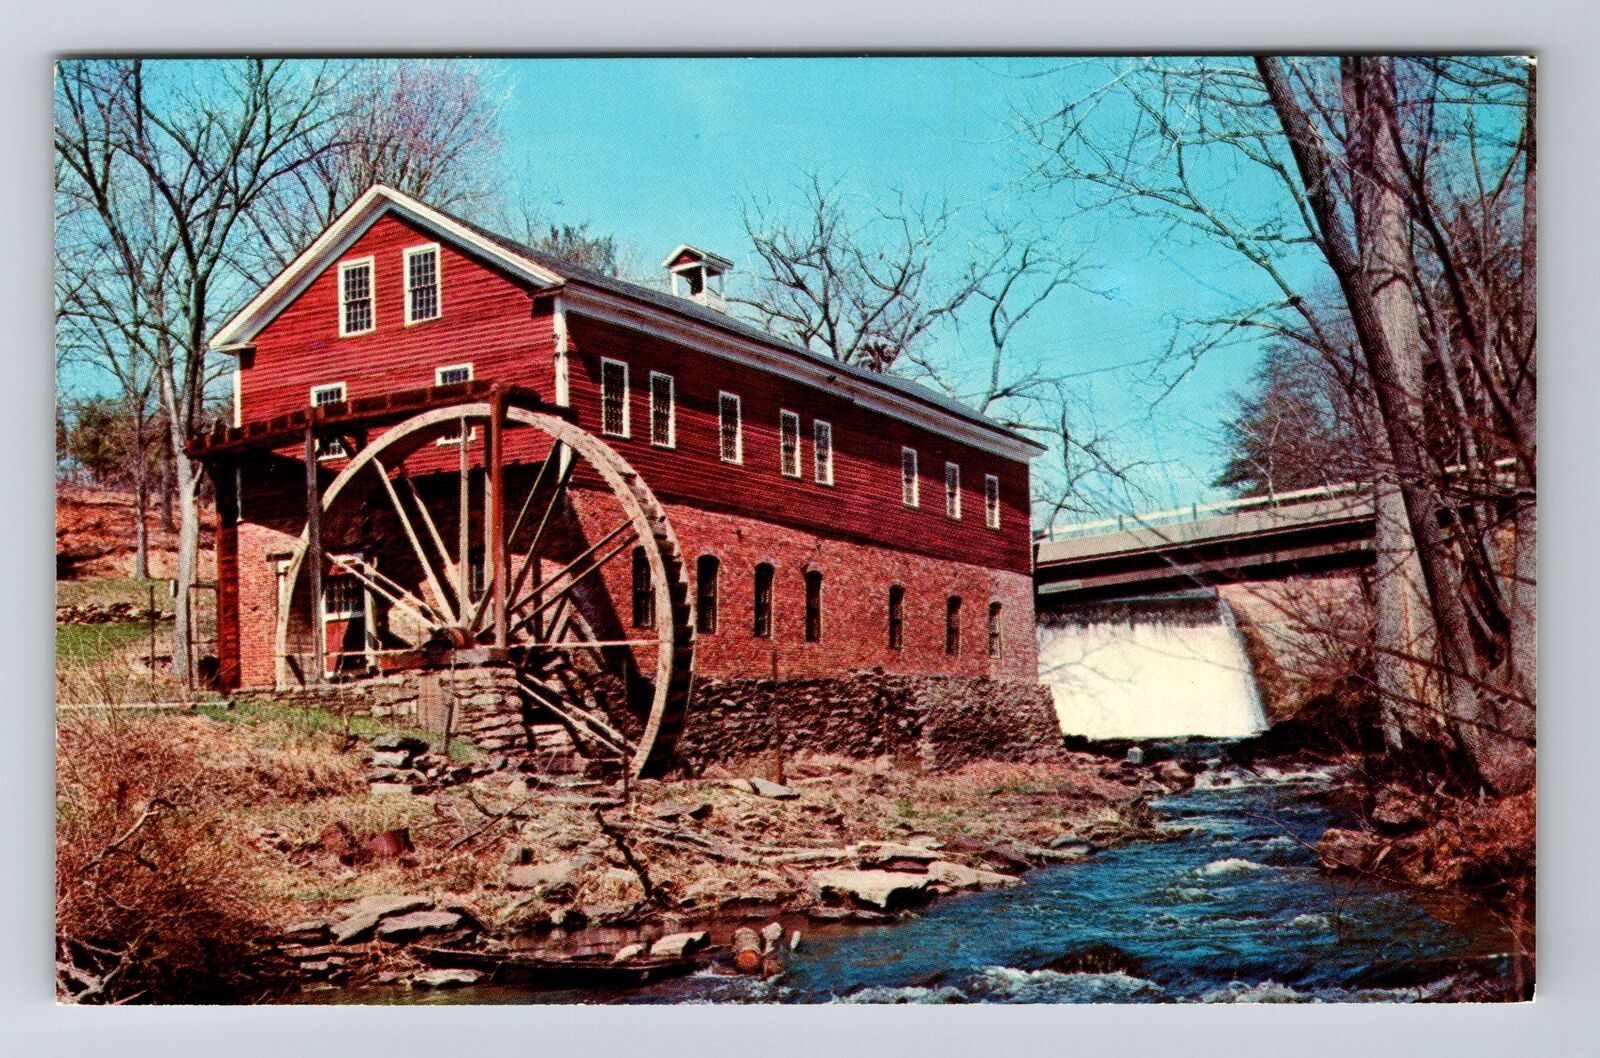 Granby MA-Massachusetts, Old Grist Mill & Water Wheel, Vintage Postcard